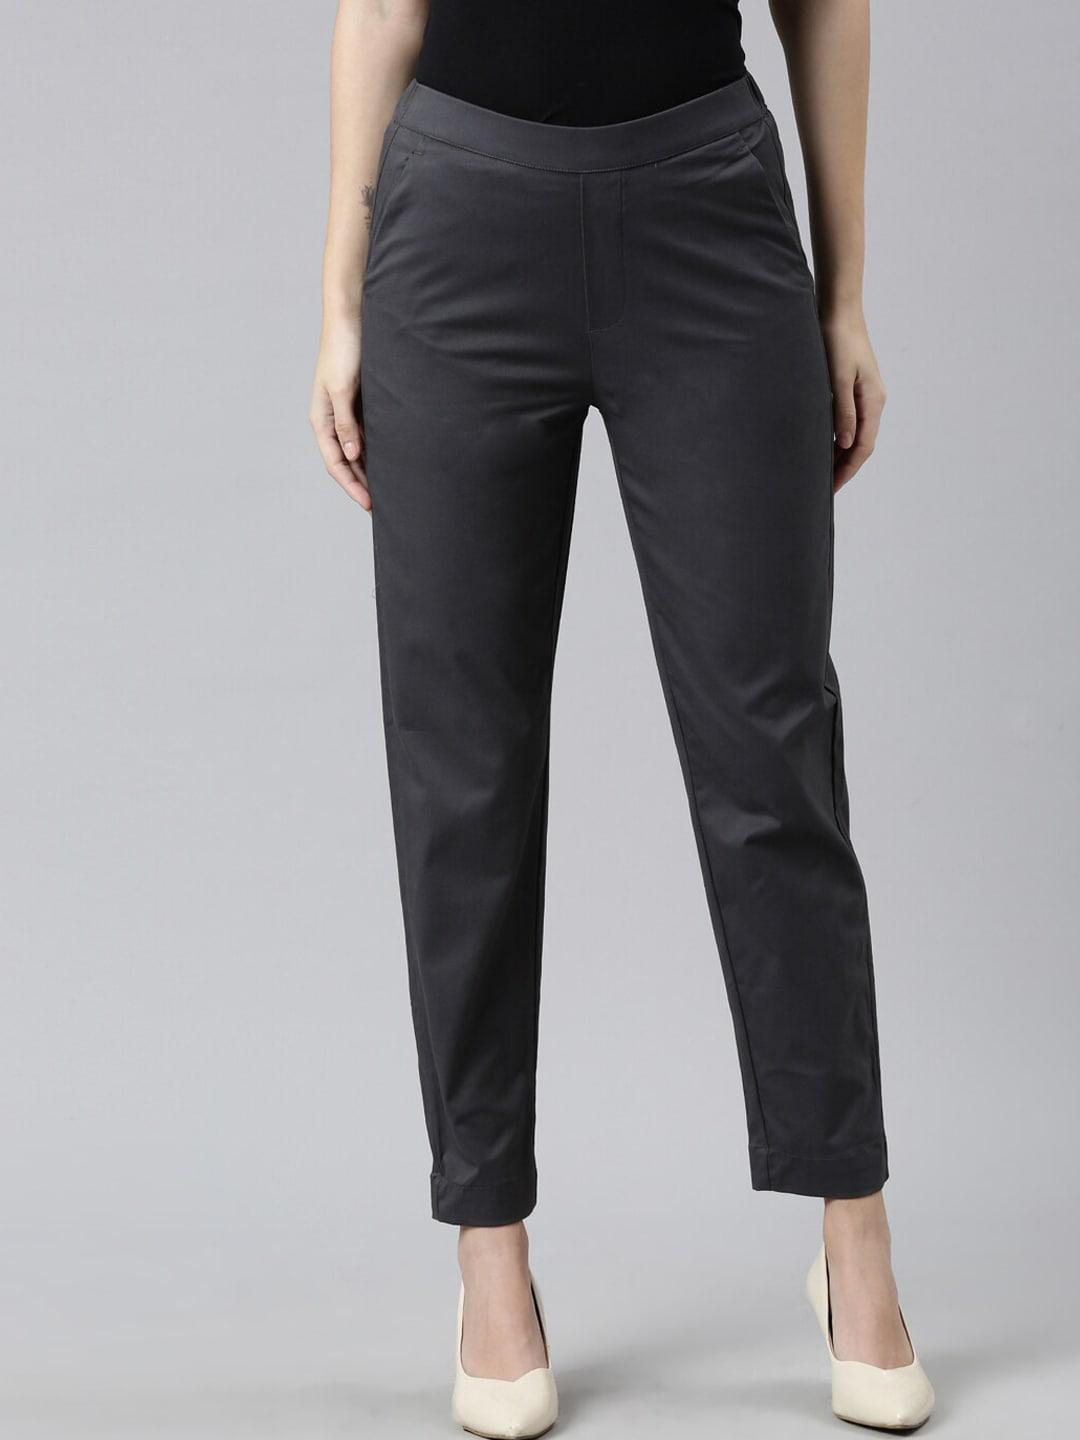 Go Colors Women Grey Cotton Straight Fit Formal Trousers